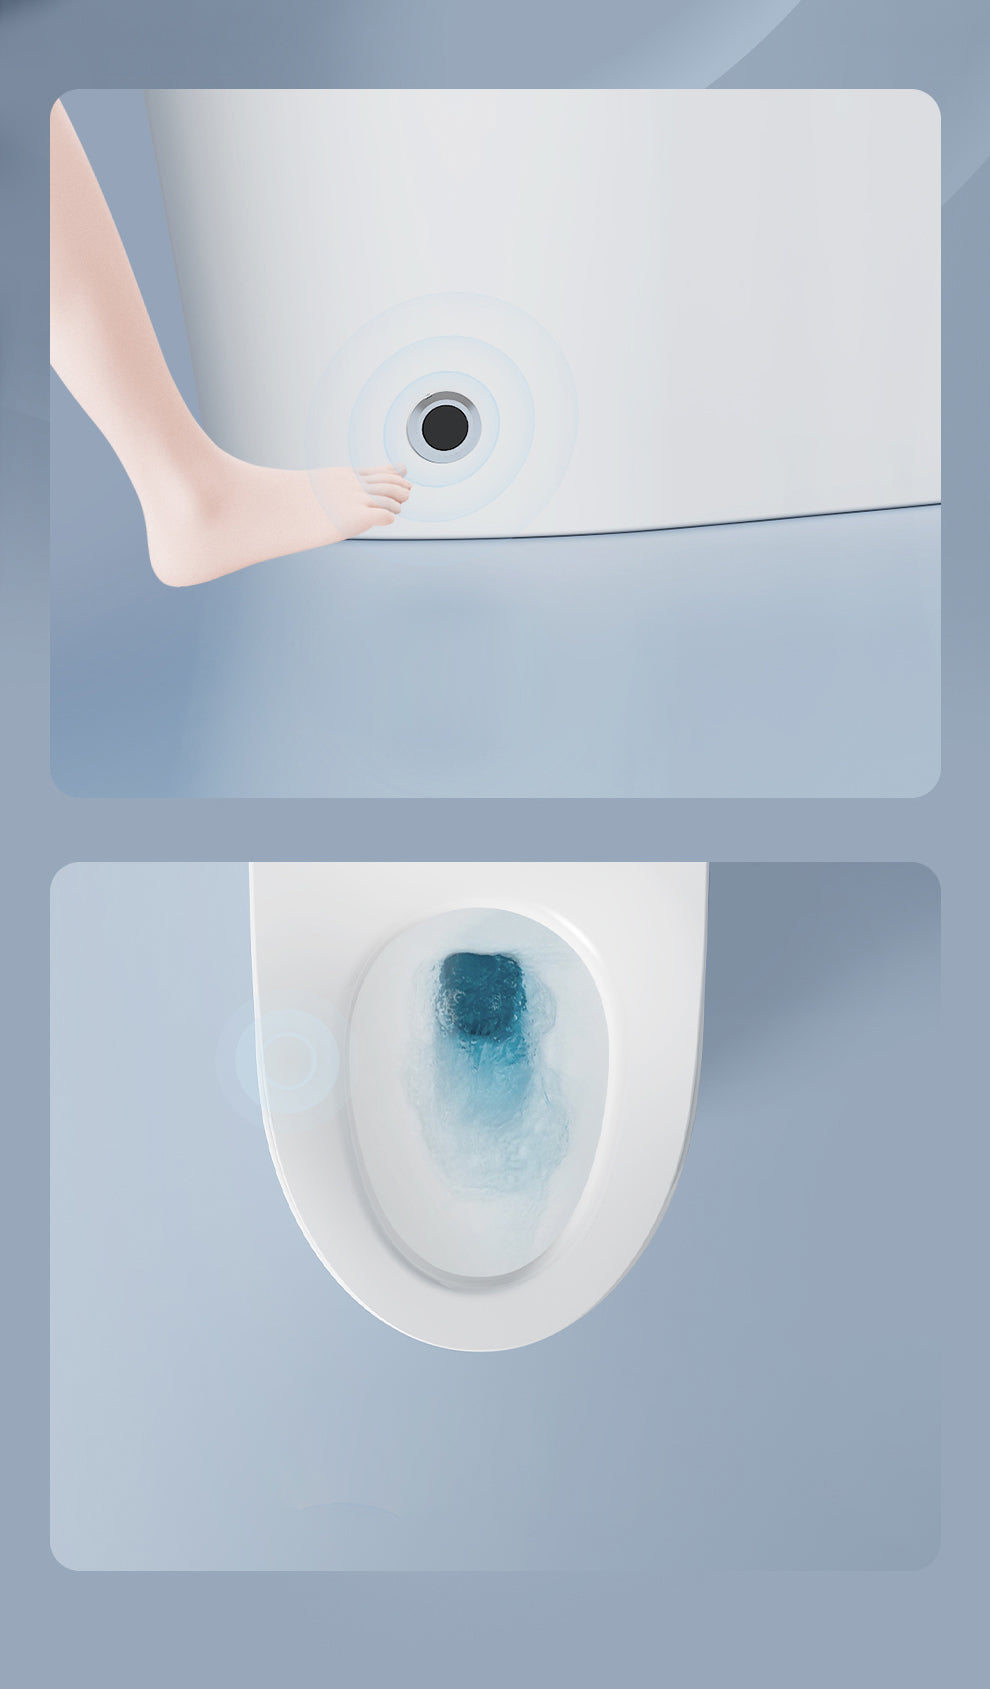 Smart Toilet with Auto Flush, Warm Water and Heated Seat, Modern Tankless Toilet with Remote Control